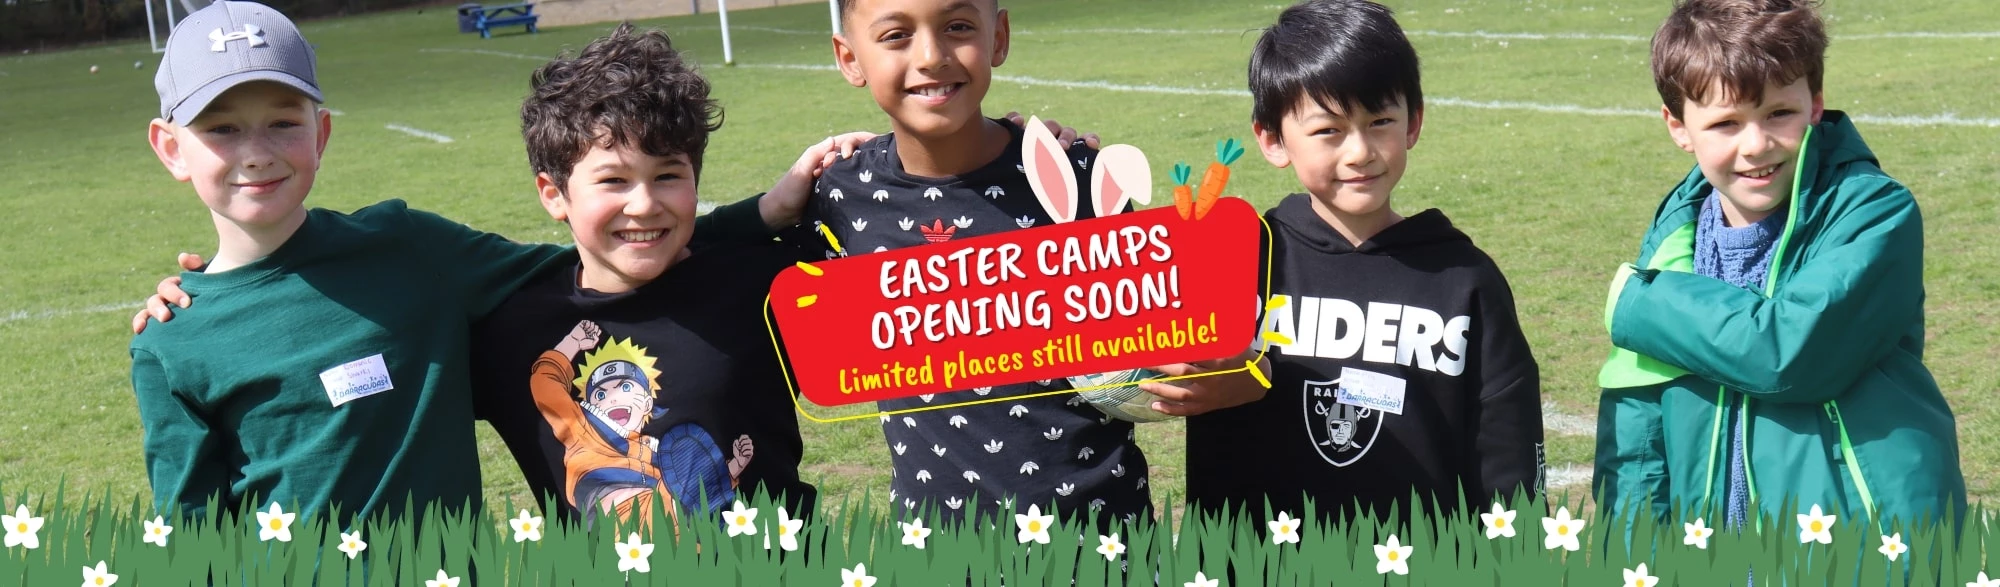 Amazing Easter camps for kids